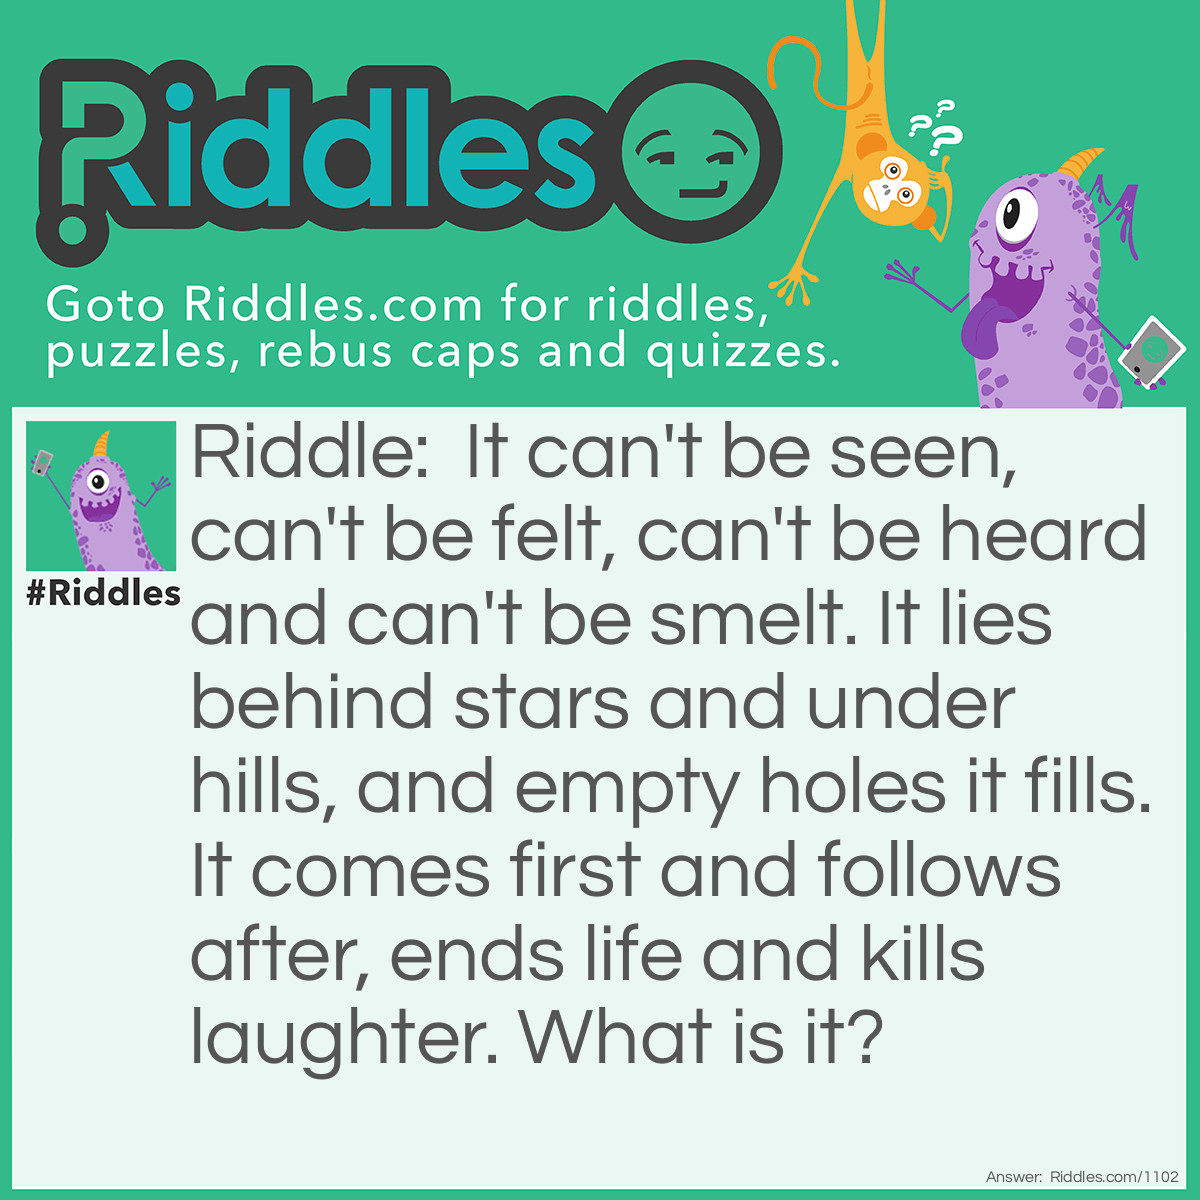 Riddle: It can't be seen, can't be felt, can't be heard, and can't be smelt. It lies behind stars and under hills, And empty holes it fills. It comes first and follows after, Ends life, and kills laughter. What is it? Answer: The dark.